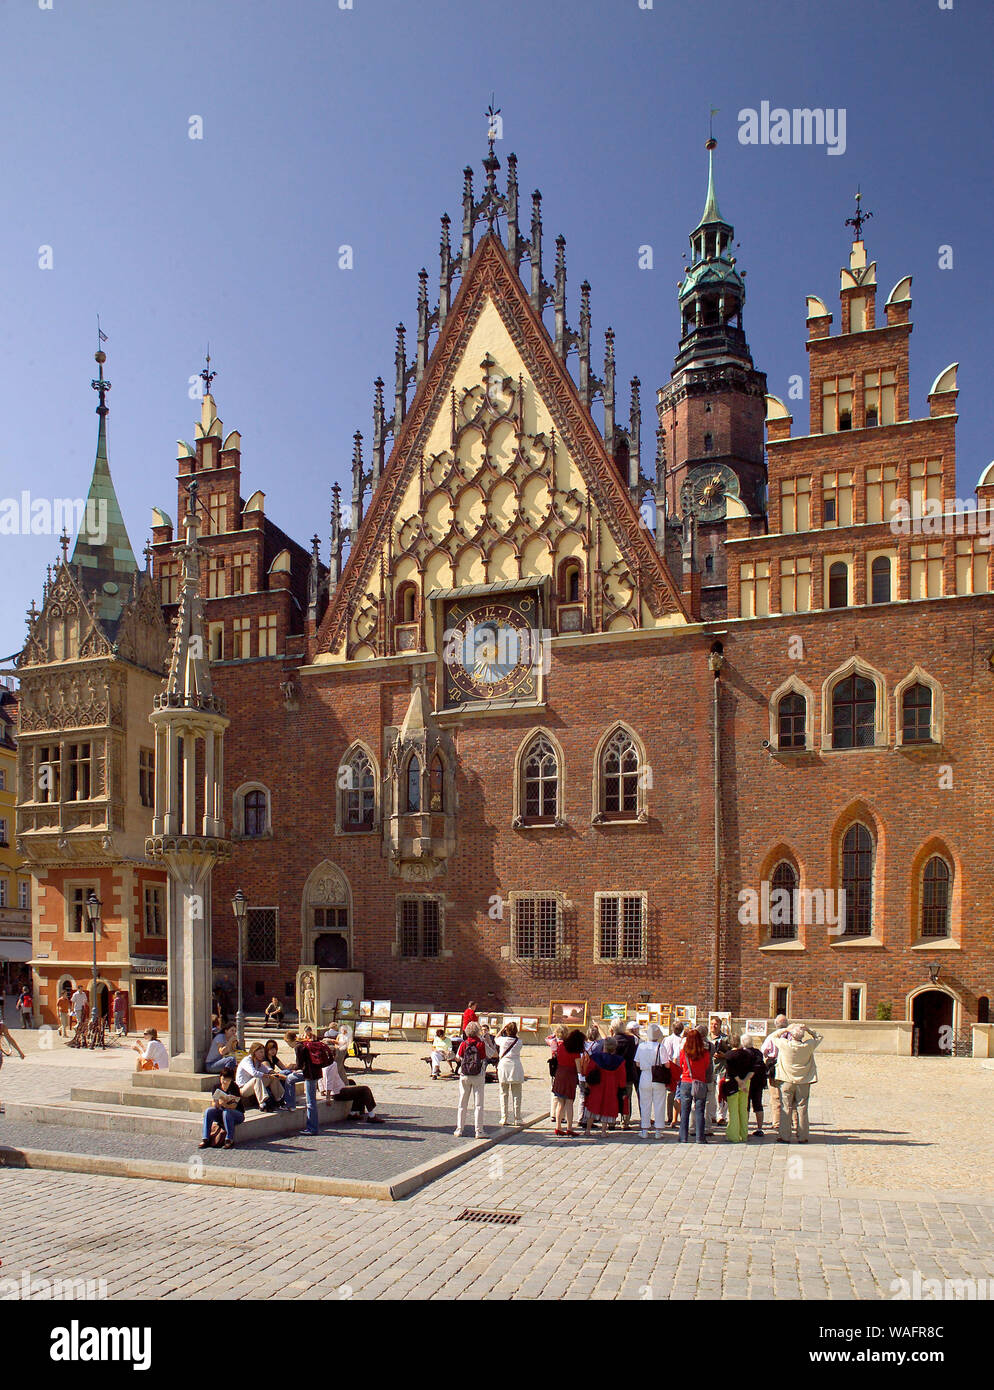 Town hall in Wroclaw. The only gothic secular building in Lower Silesia.  Fot: Marek Skorupski Stock Photo - Alamy